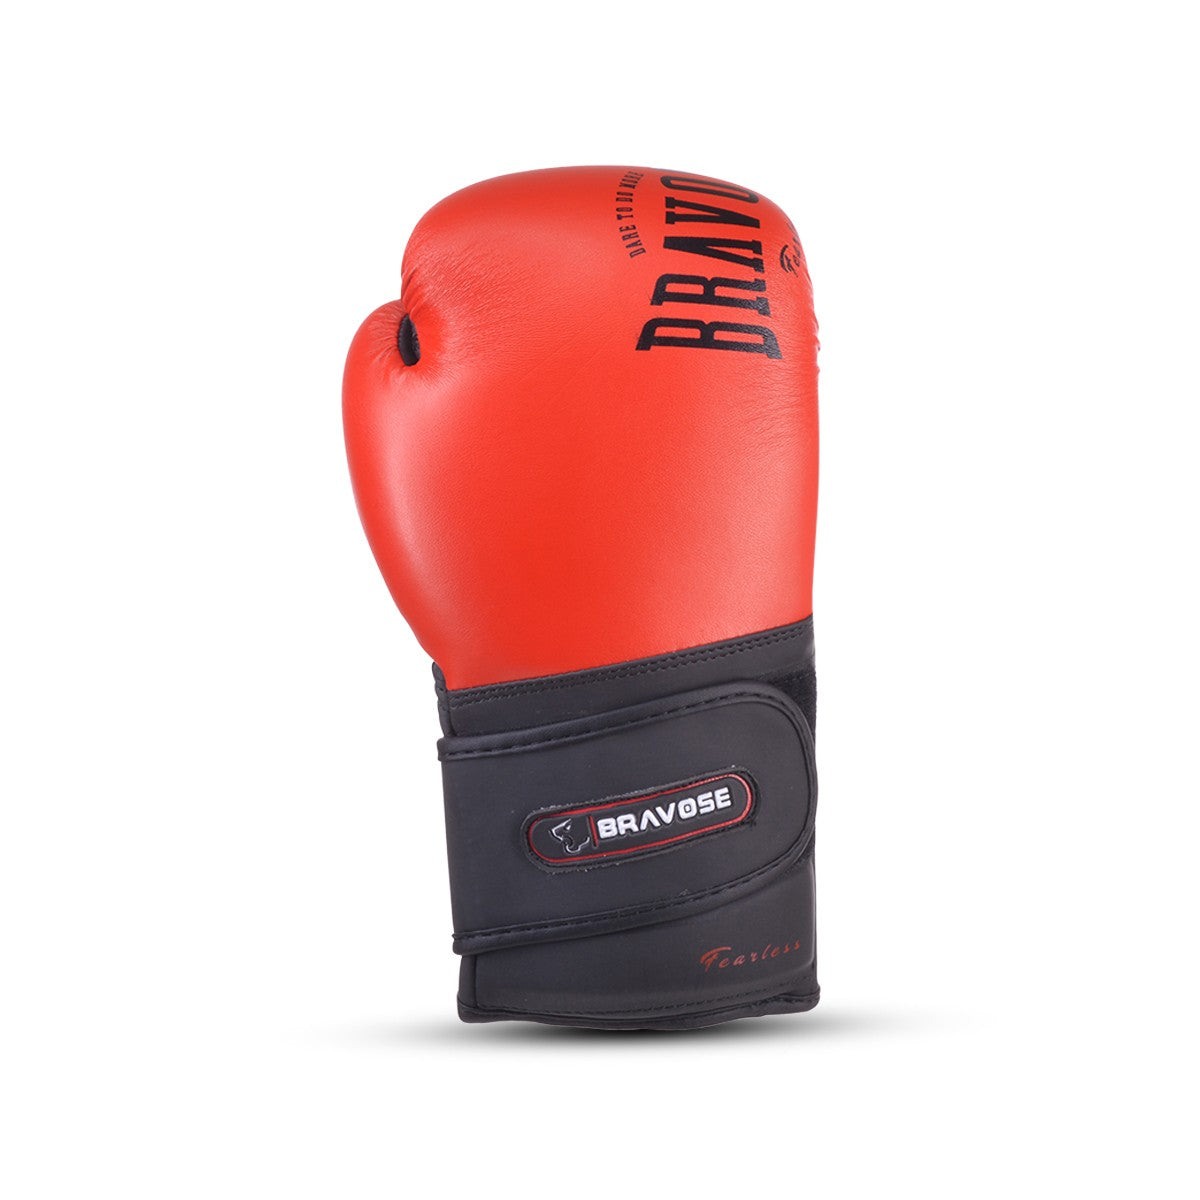 Fearless Red Kids Boxing Gloves, Children Bag Mitts for training & sparring - Bravose